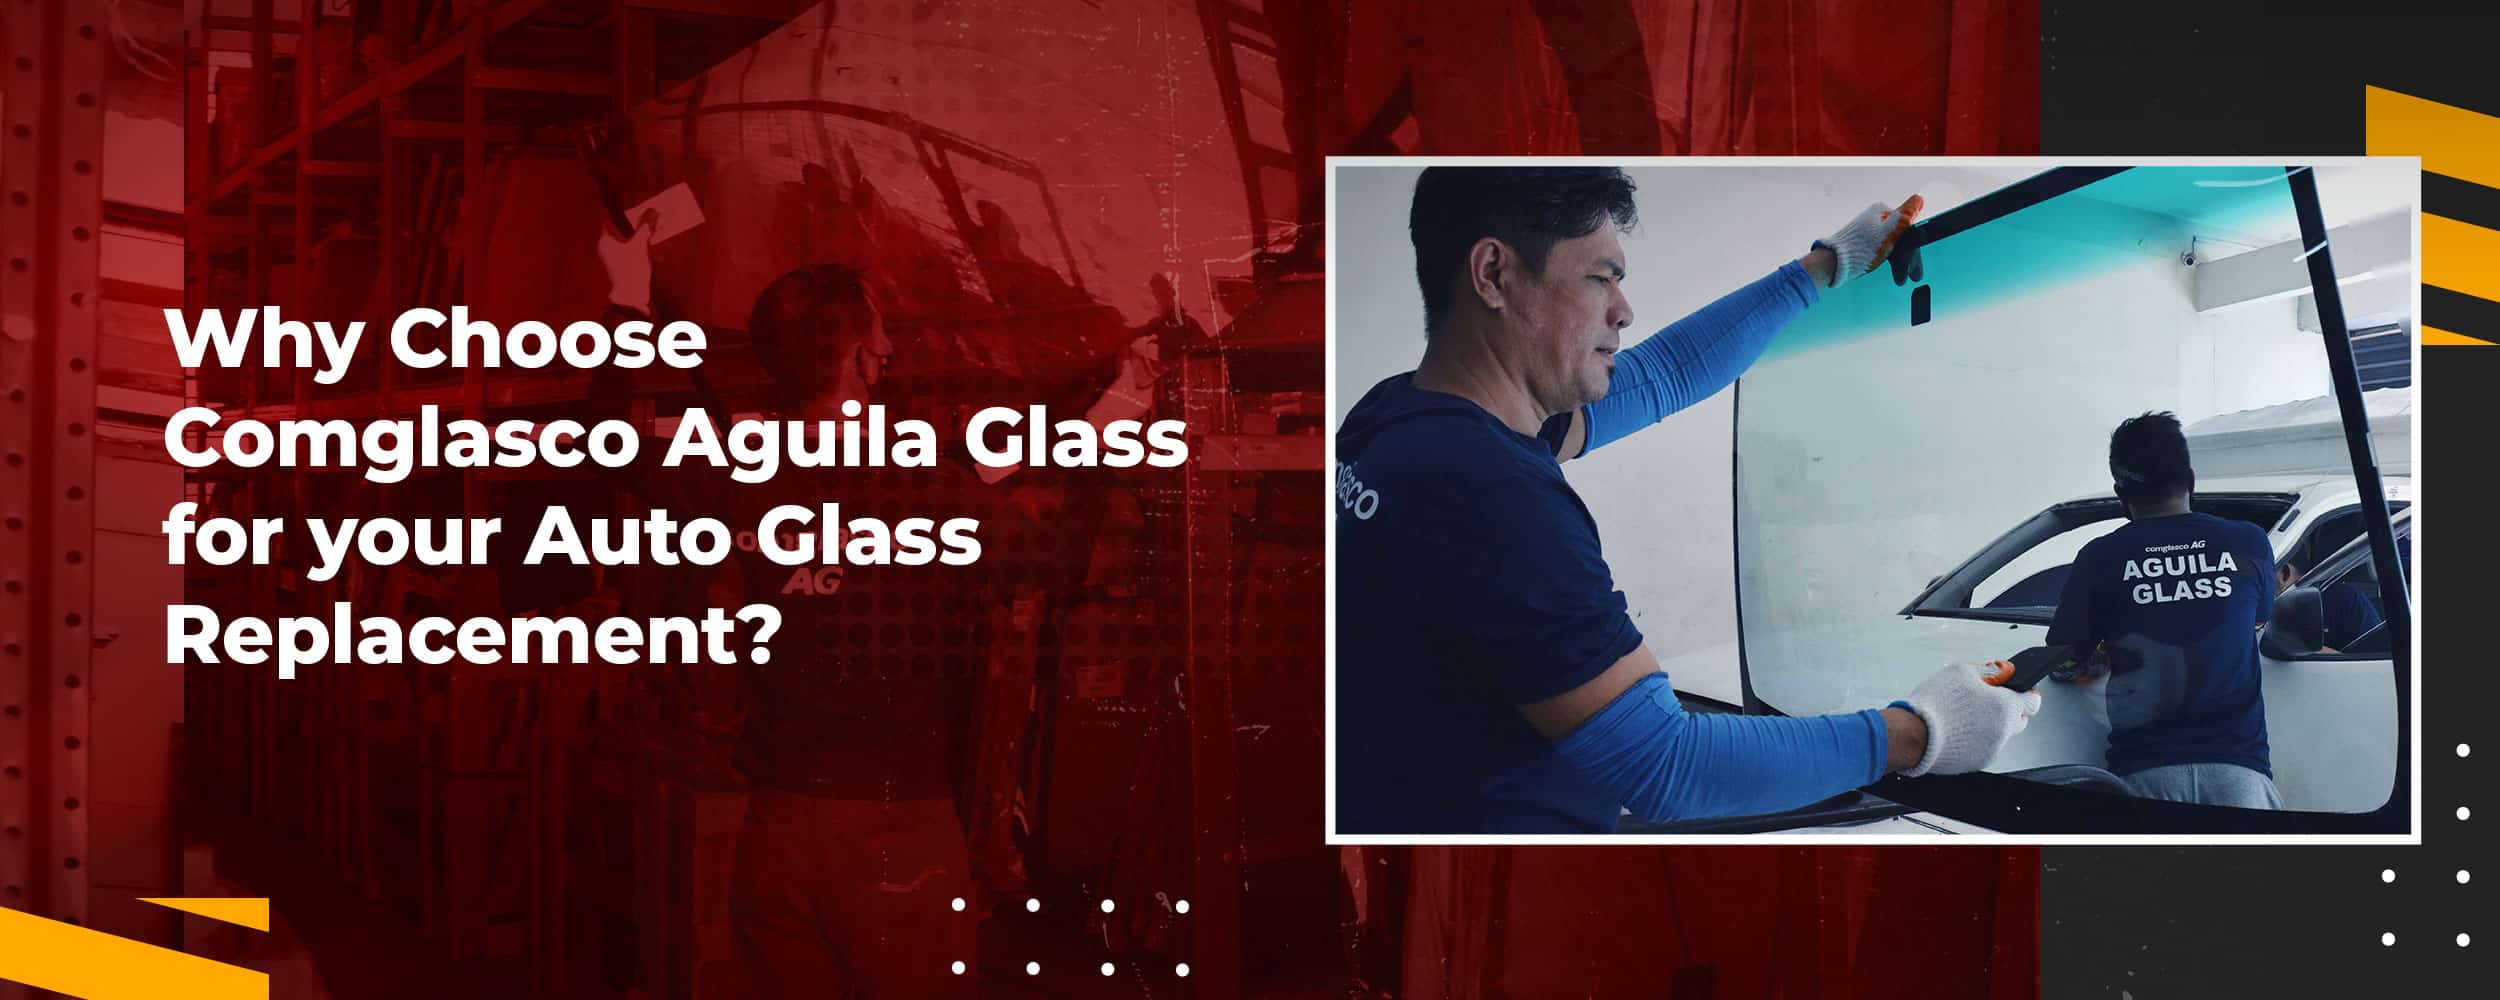 Why Choose Comglasco Aguila Glass for your Auto Glass Replacement